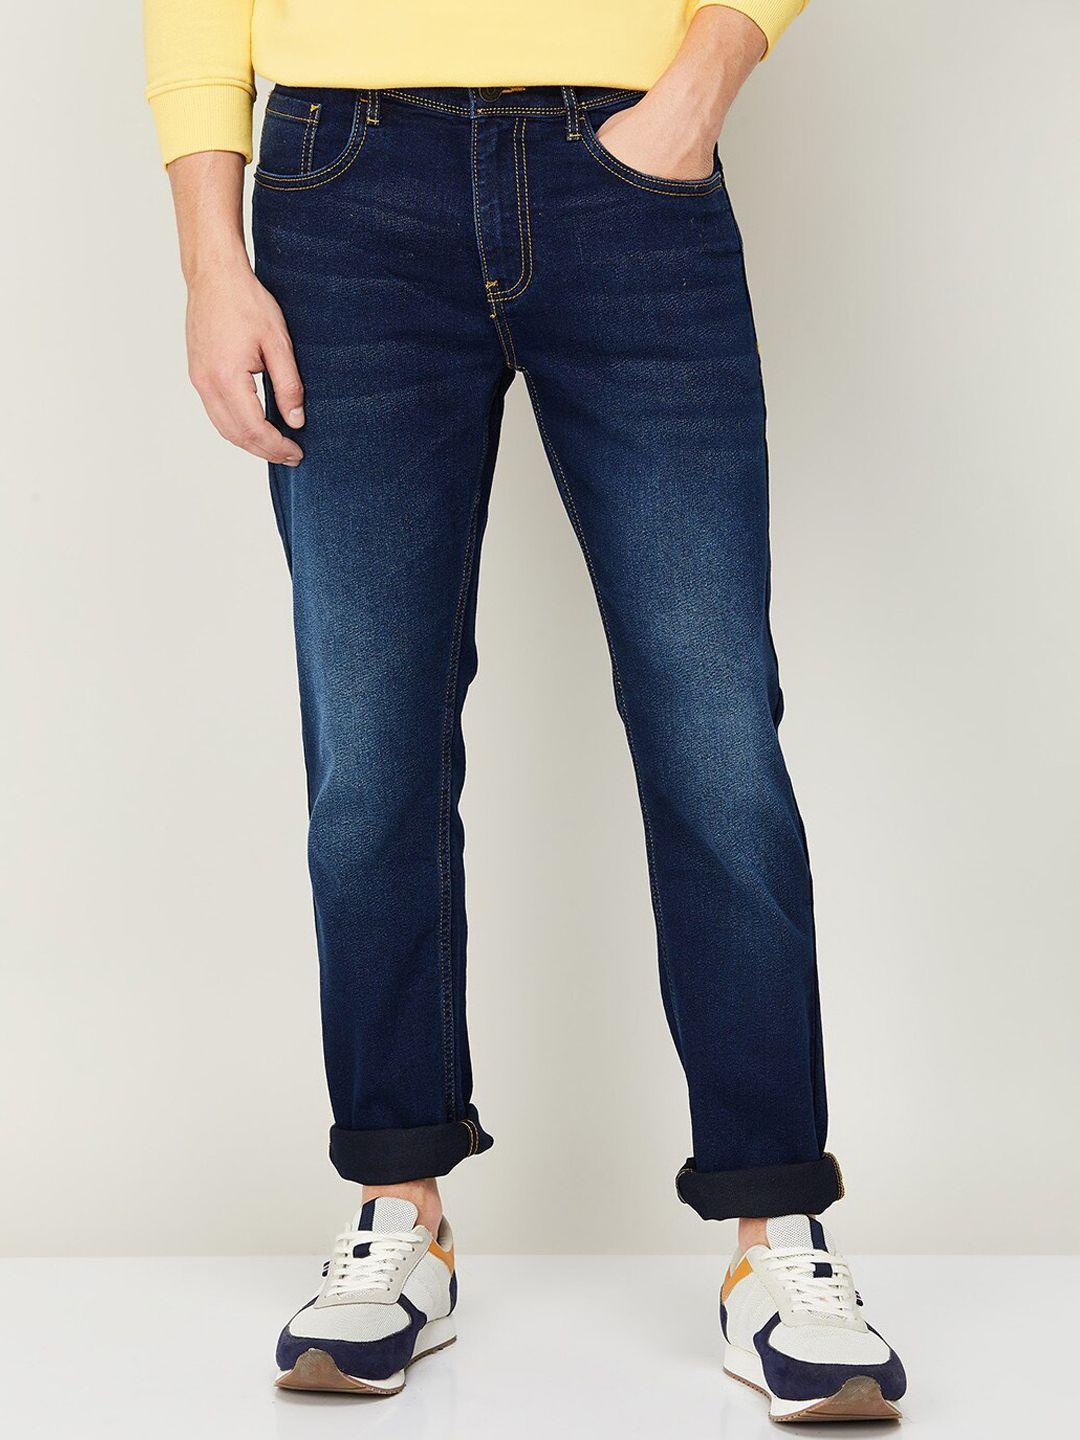 fame-forever-by-lifestyle-men-navy-blue-light-fade-cotton-jeans